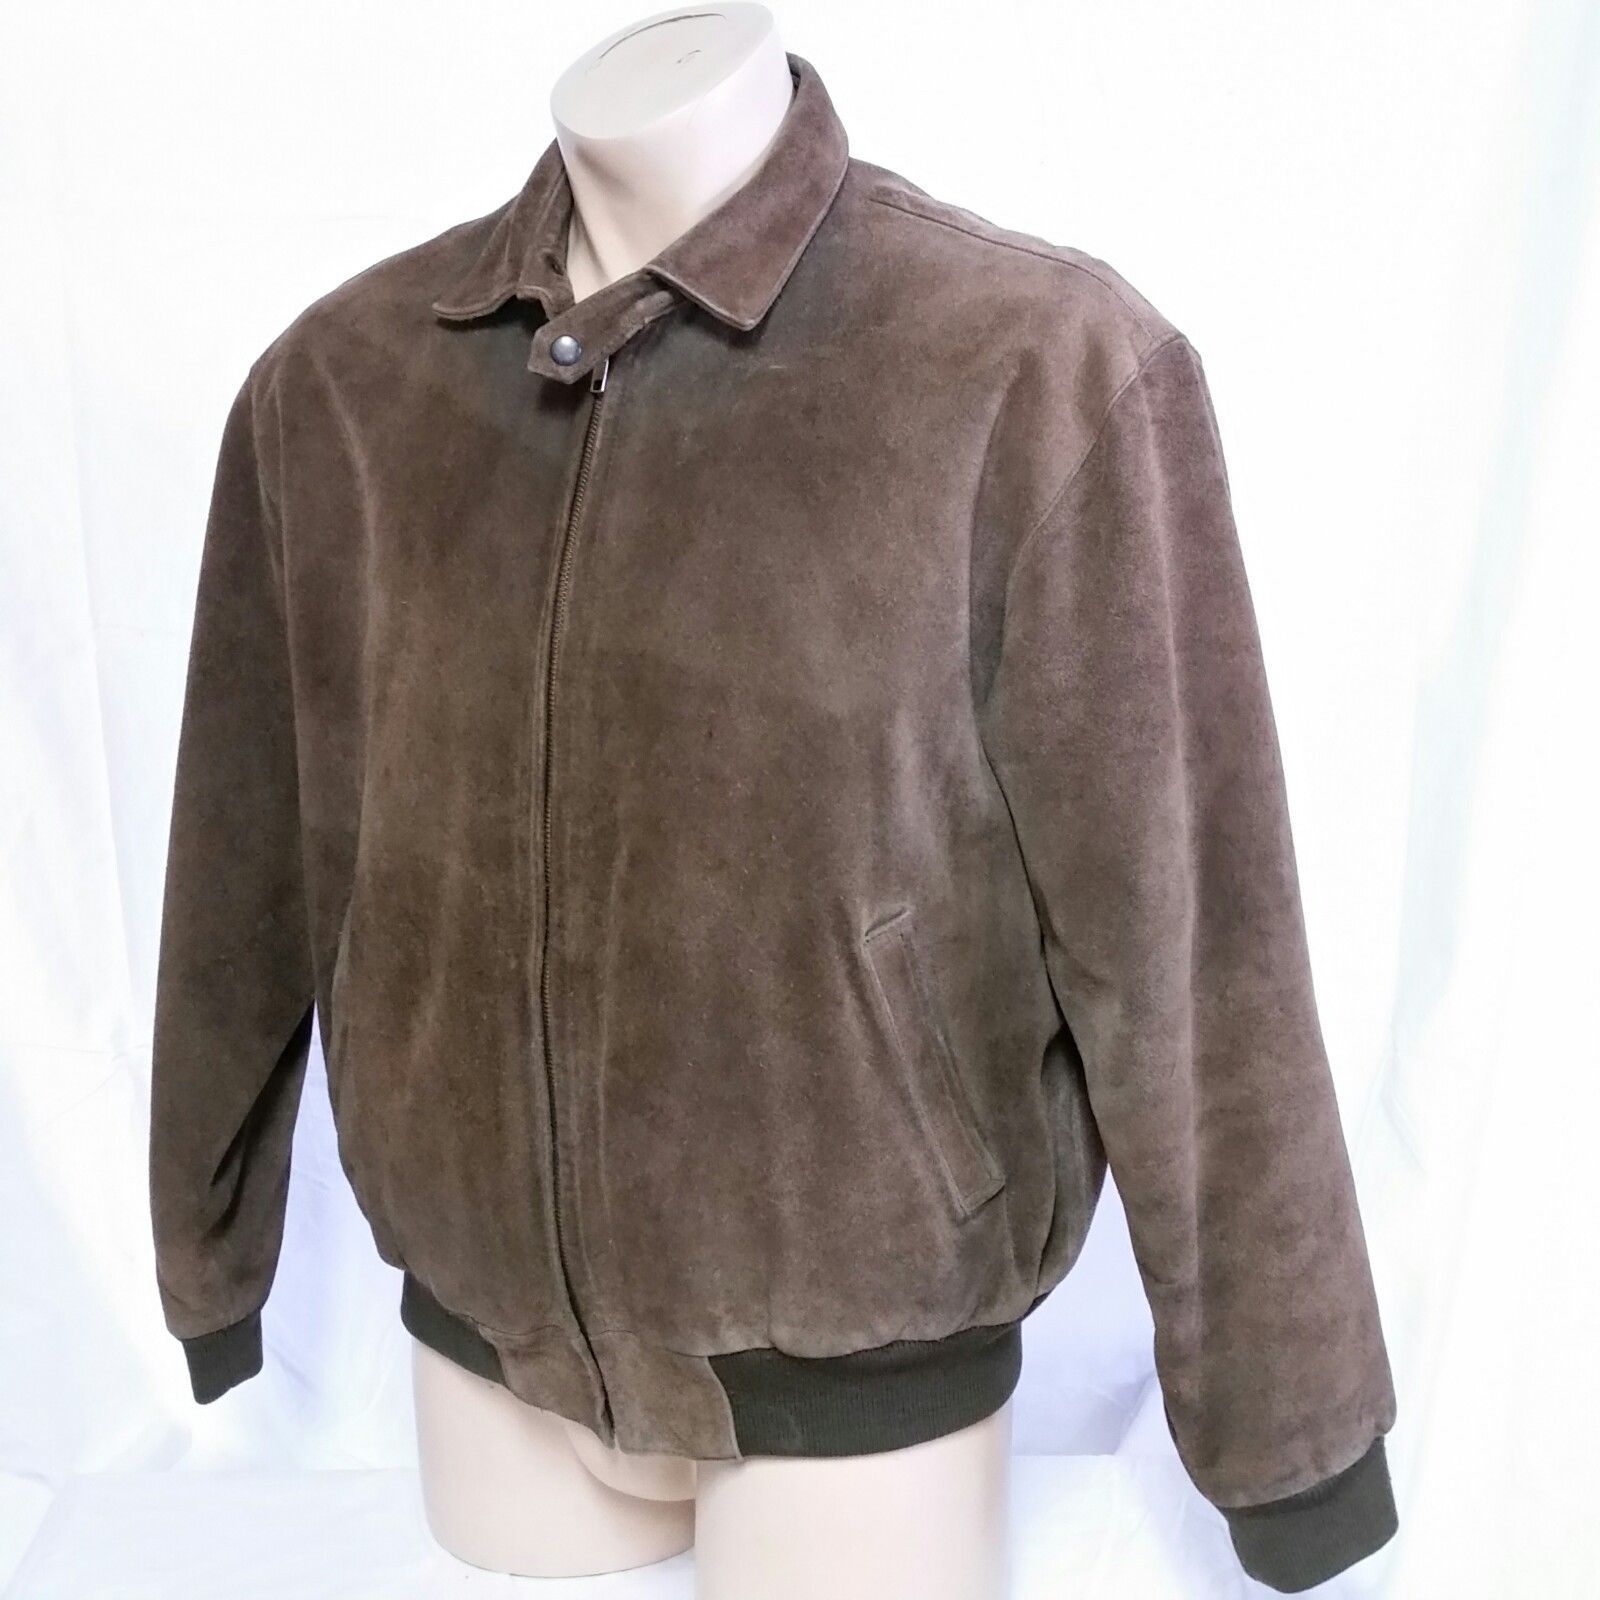 VTG Polo Ralph Lauren Suede Leather Jacket Bomber Coat Chin Strap 90s ...